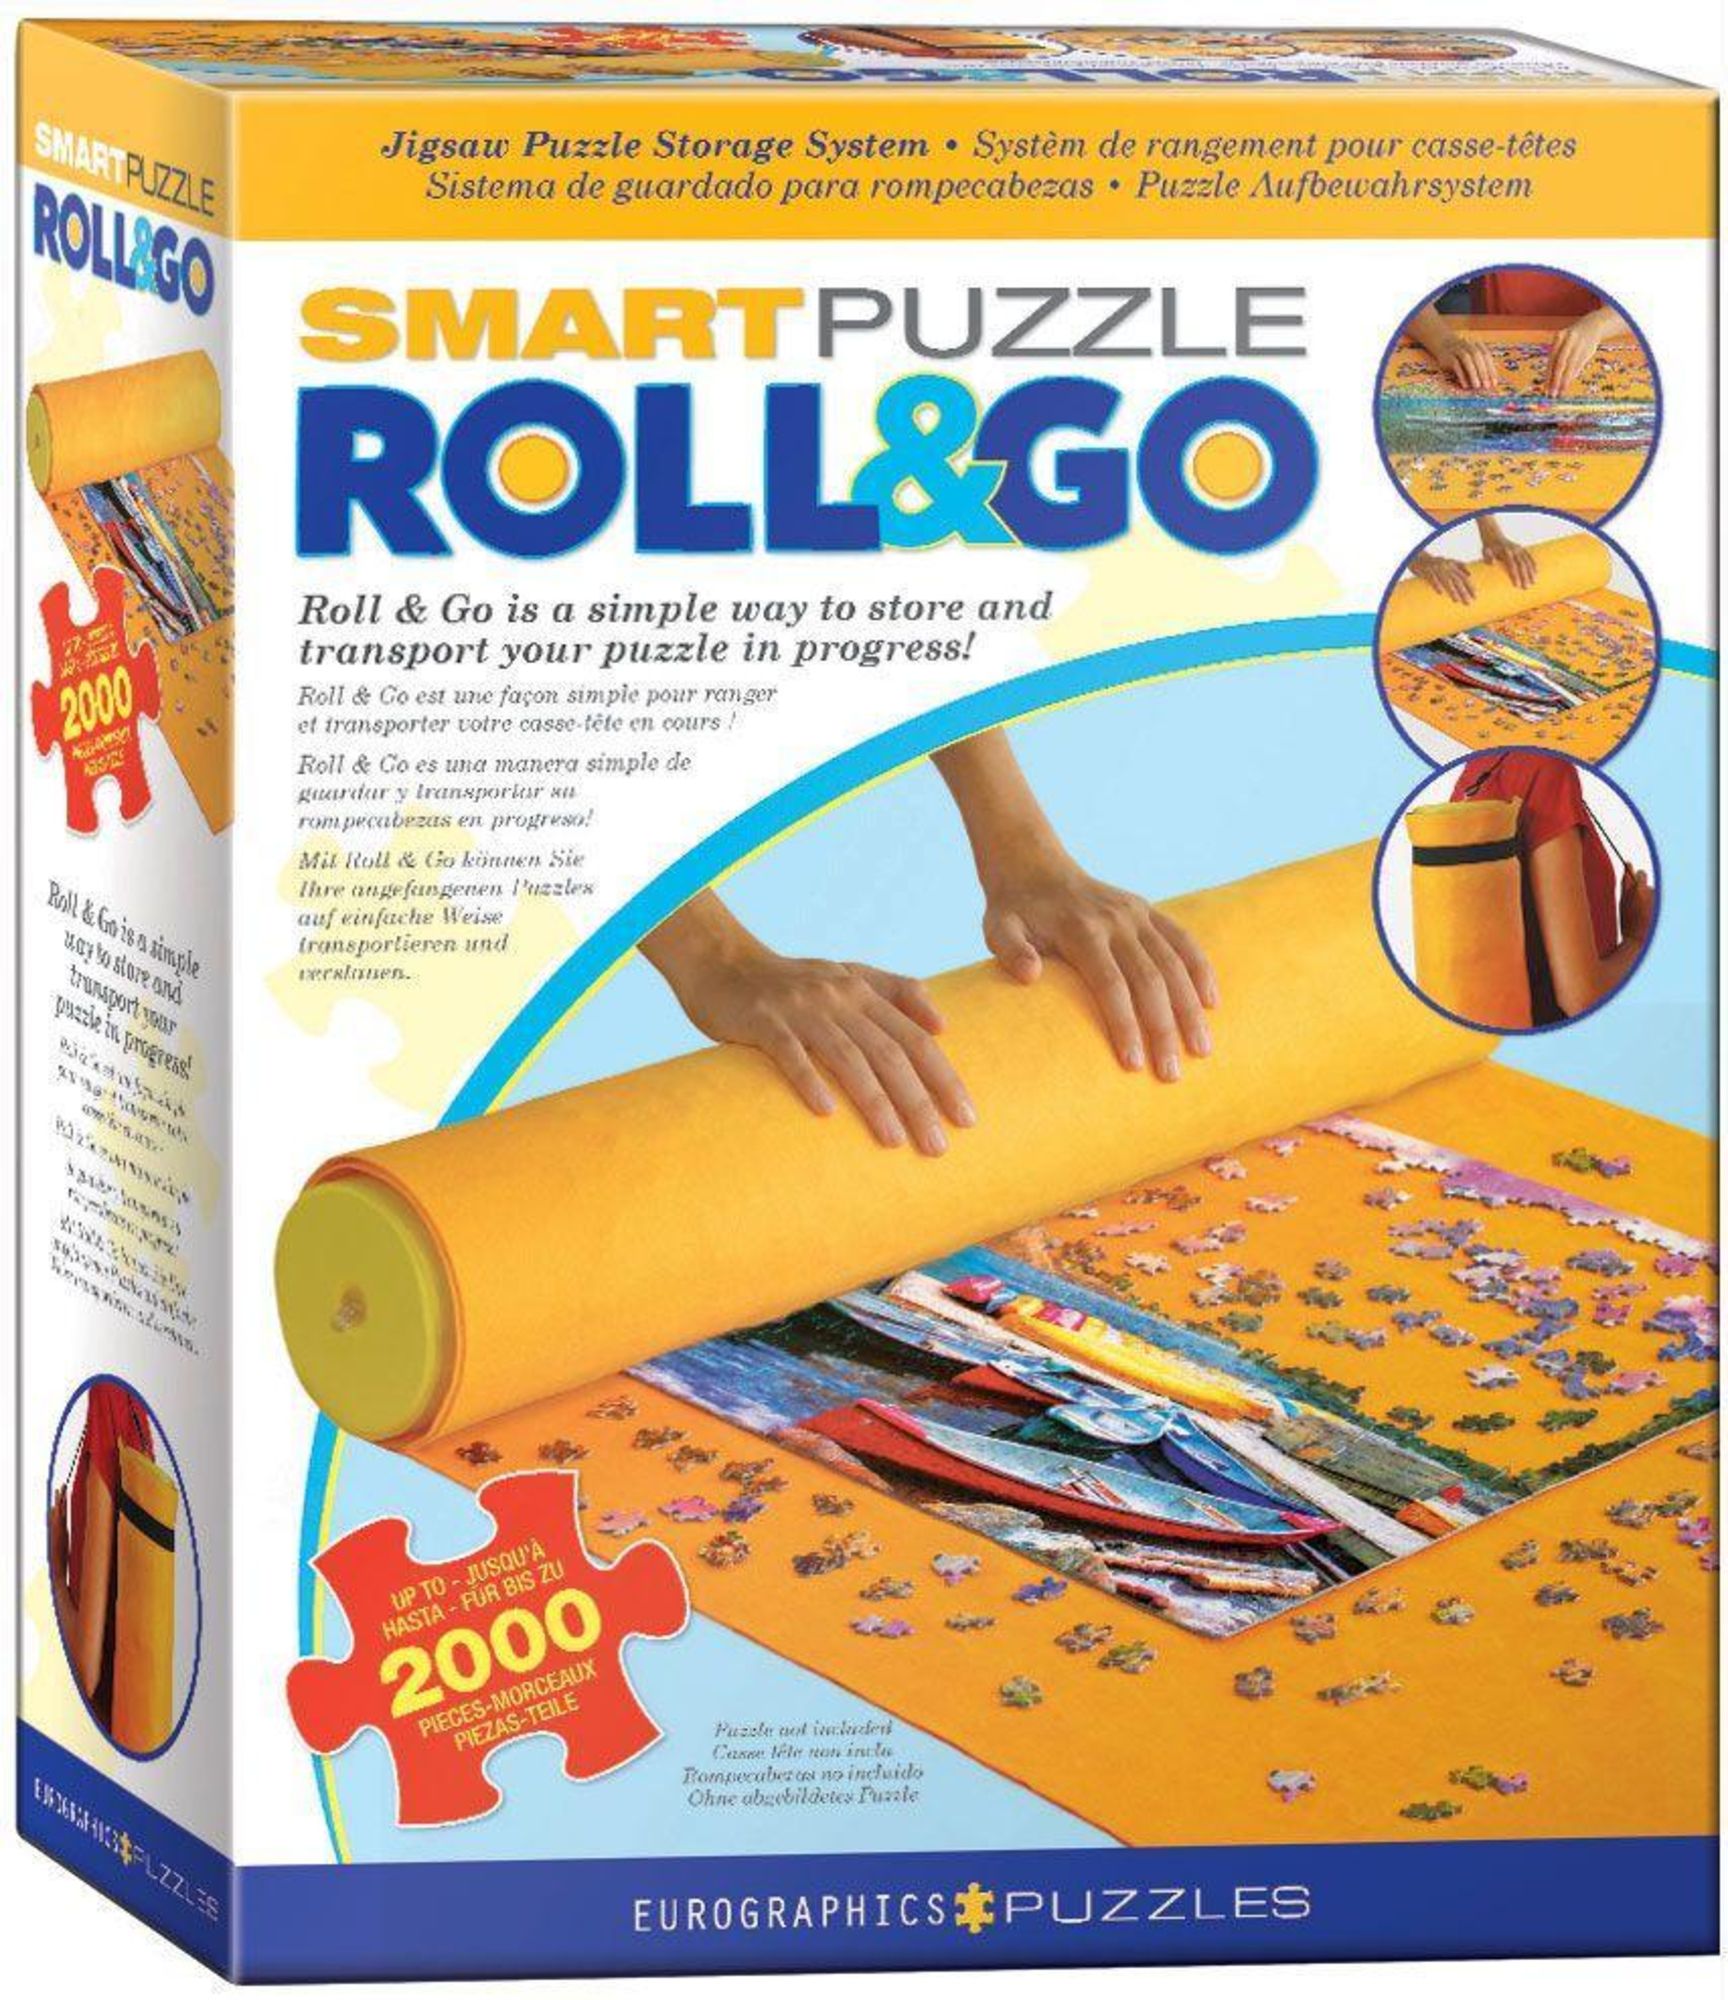 Anyingkai Roll and Store Puzzle Mat, Tragbare Puzzlematte,Matte für Puzzle  2000 Teile,Puzzlematte zum Rollen,Puzzlematte Bis 2000 Teile,Puzzle Matte